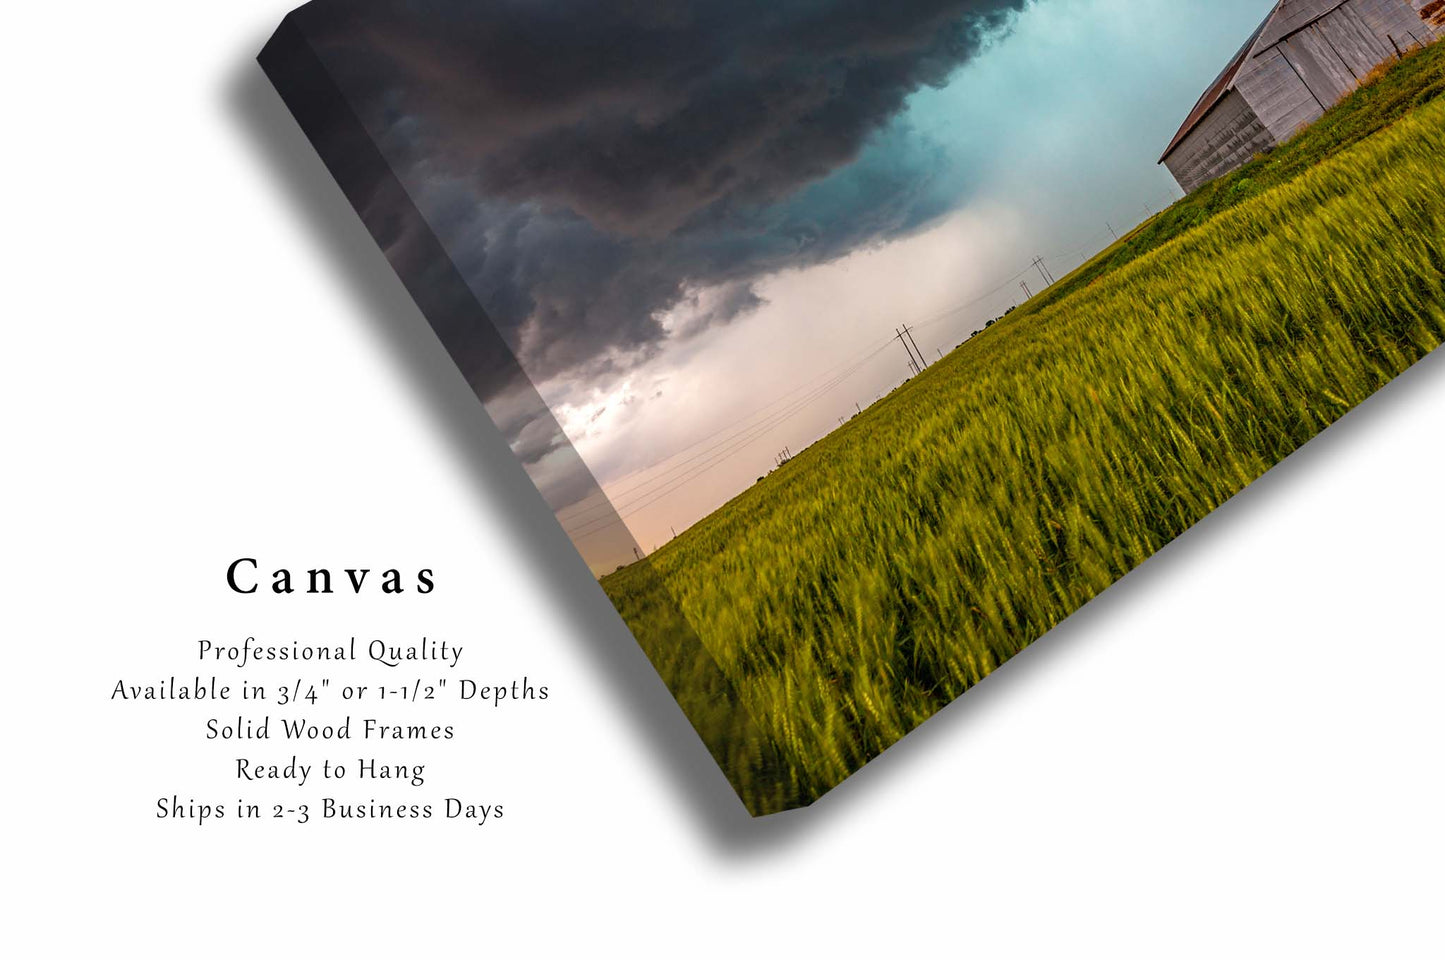 Canvas Wall Art | Thunderstorm Passing Behind Barn in Wheat Field Photo | Oklahoma Photography | Country Gallery Wrap | Farmhouse Decor